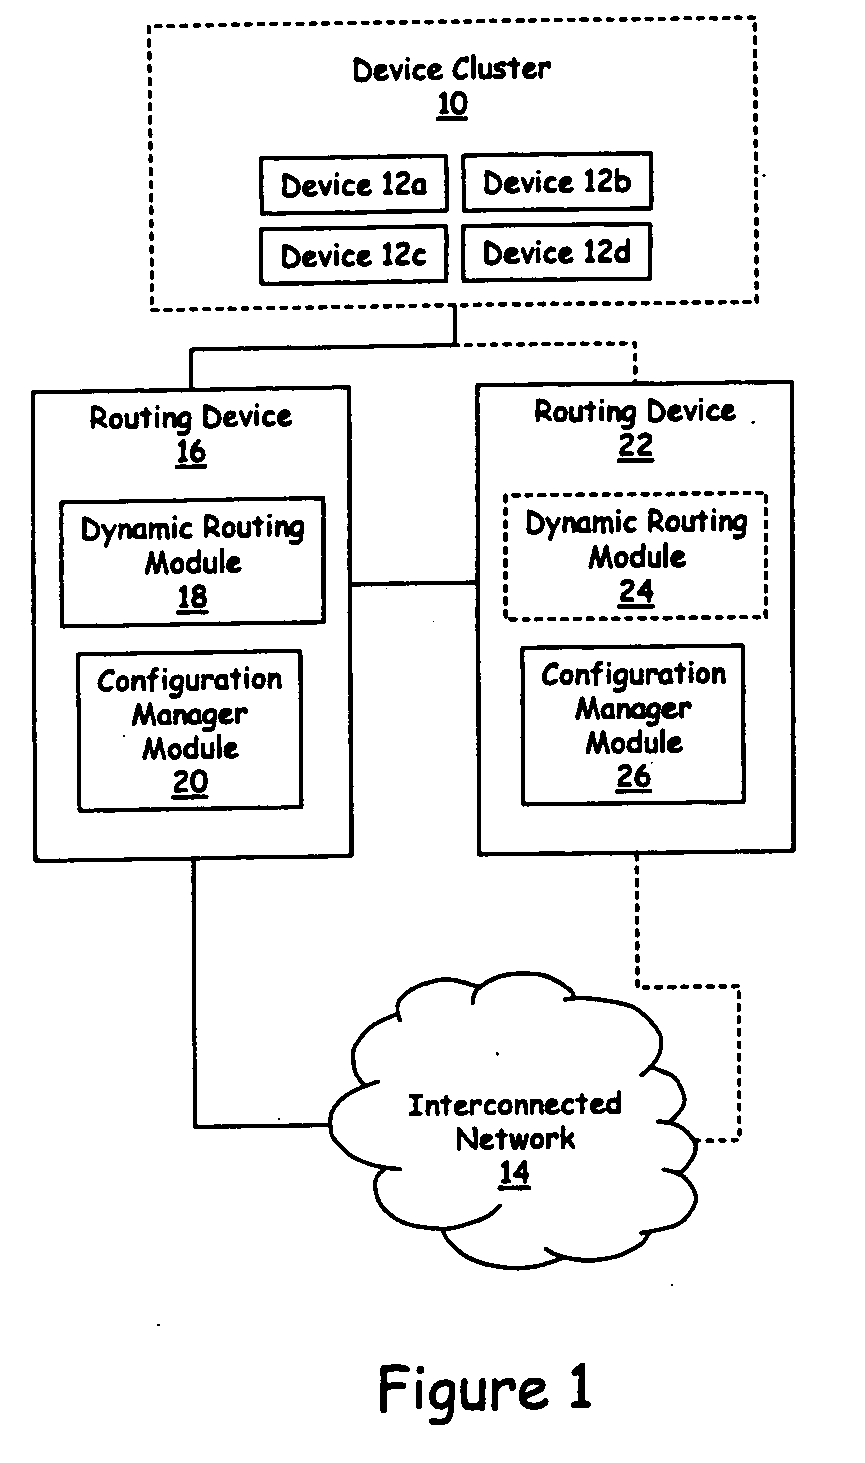 System and method for providing redundant routing capabilities for a network node